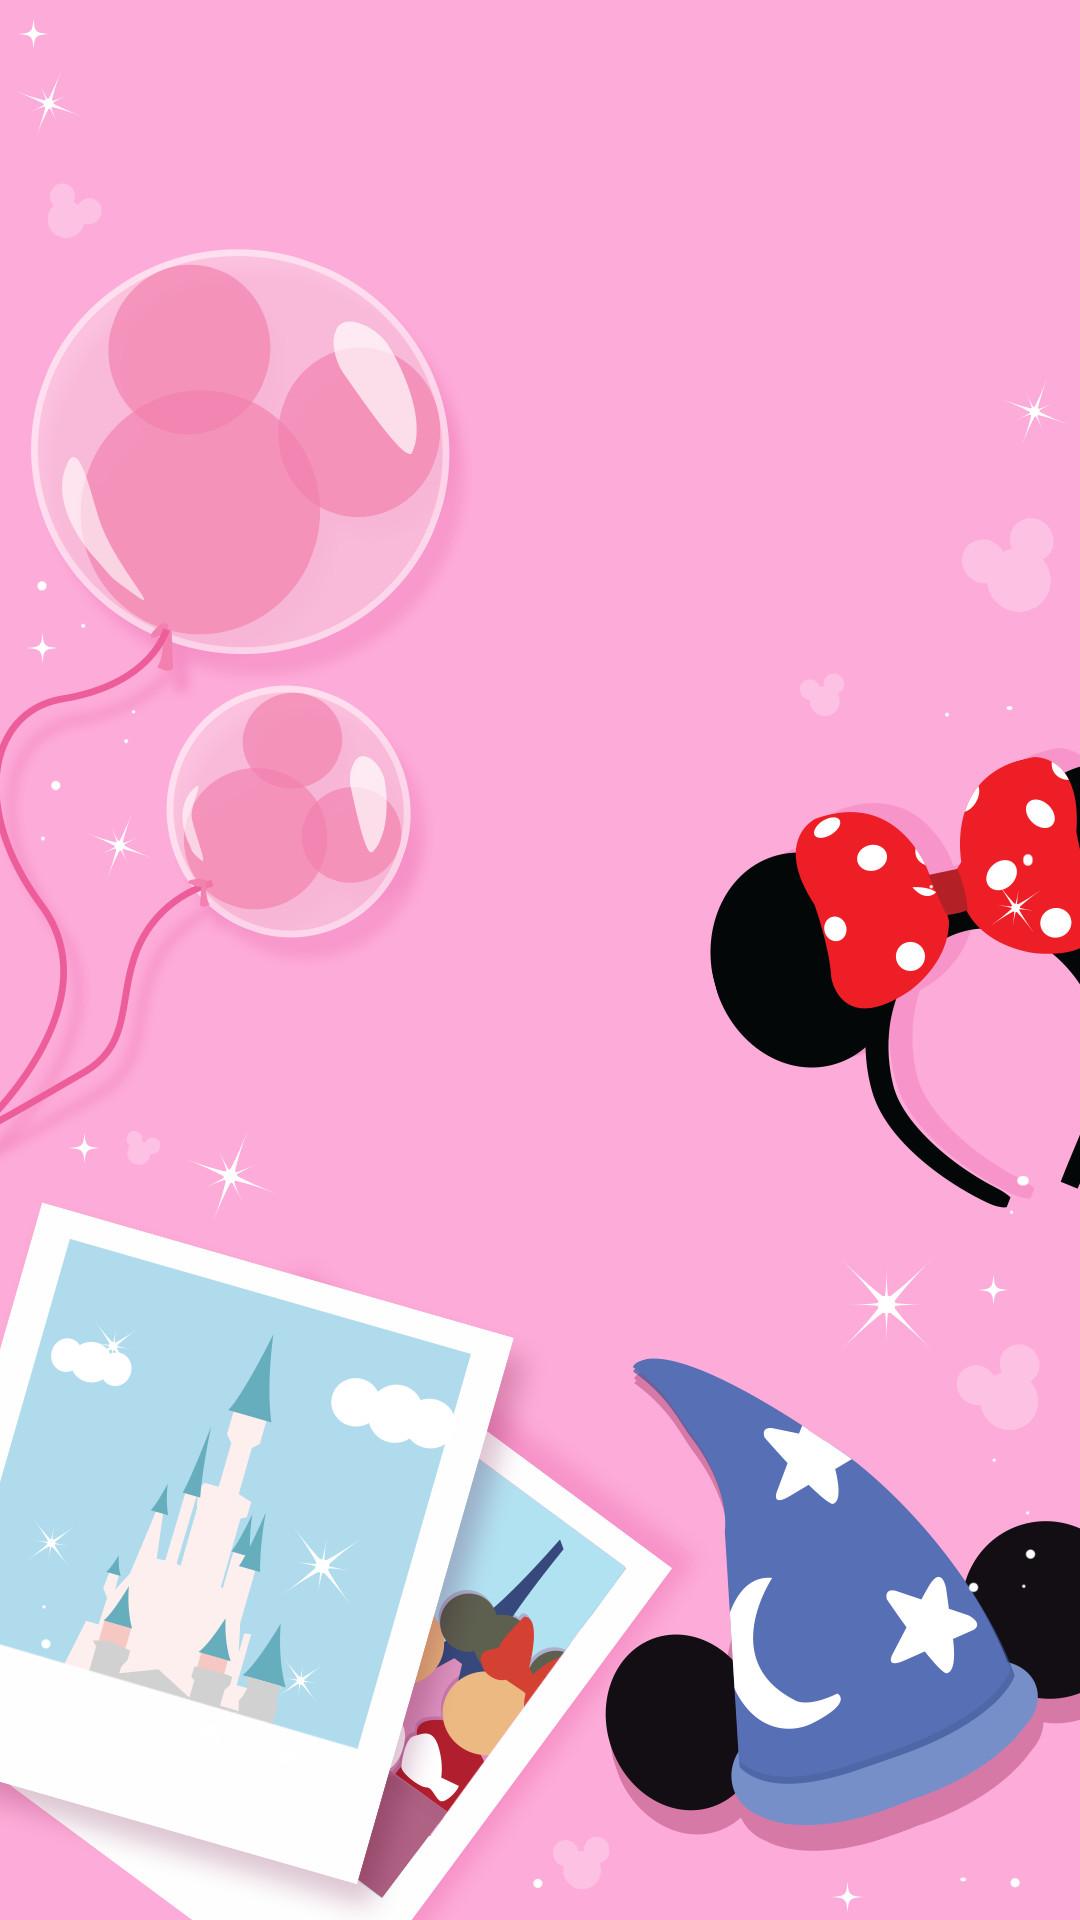 1080 x 1920 · jpeg - Cute Disney Wallpapers for iPhone (80+ images)